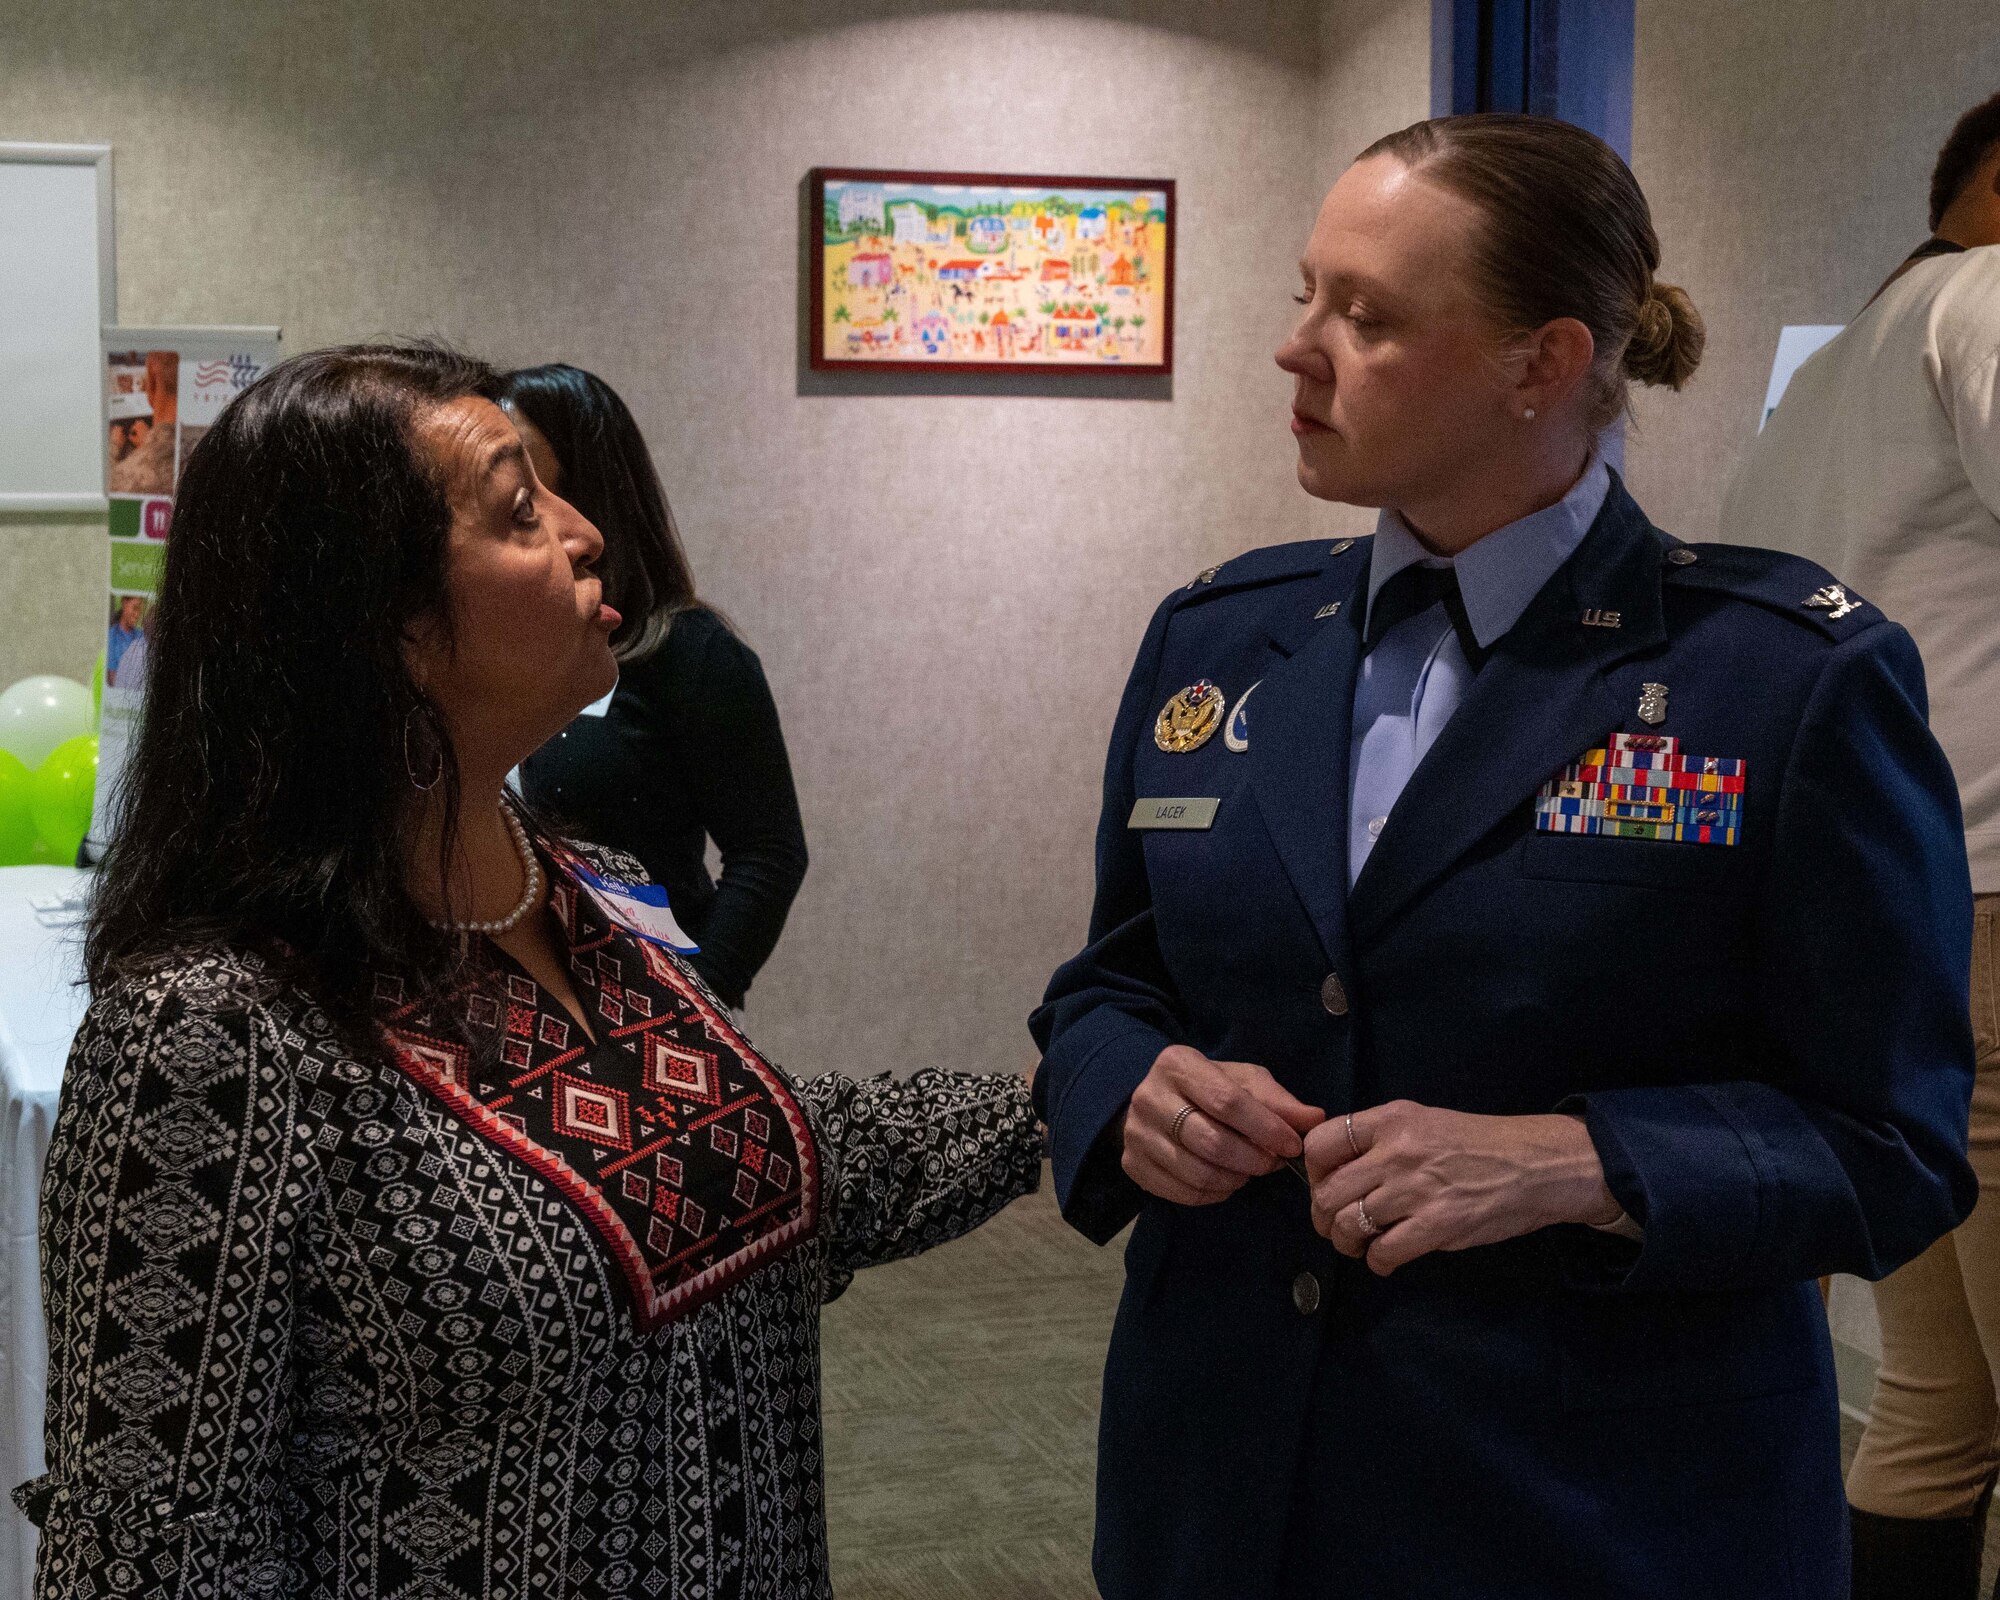 Sandra Saluda (left), Humana Military Health System manager, speaks with U.S. Air Force Col. Angela Lacek (Right), 47th Medical Group commander, on Nov. 16, 2022, at Laughlin Air Force Base, Texas. The Humana Military Open House gives an opportunity for military medical service providers and local medical service providers to connect and build a better understanding of how everyone operates. (U.S. Air Force photo by Senior Airman Nicholas Larsen)